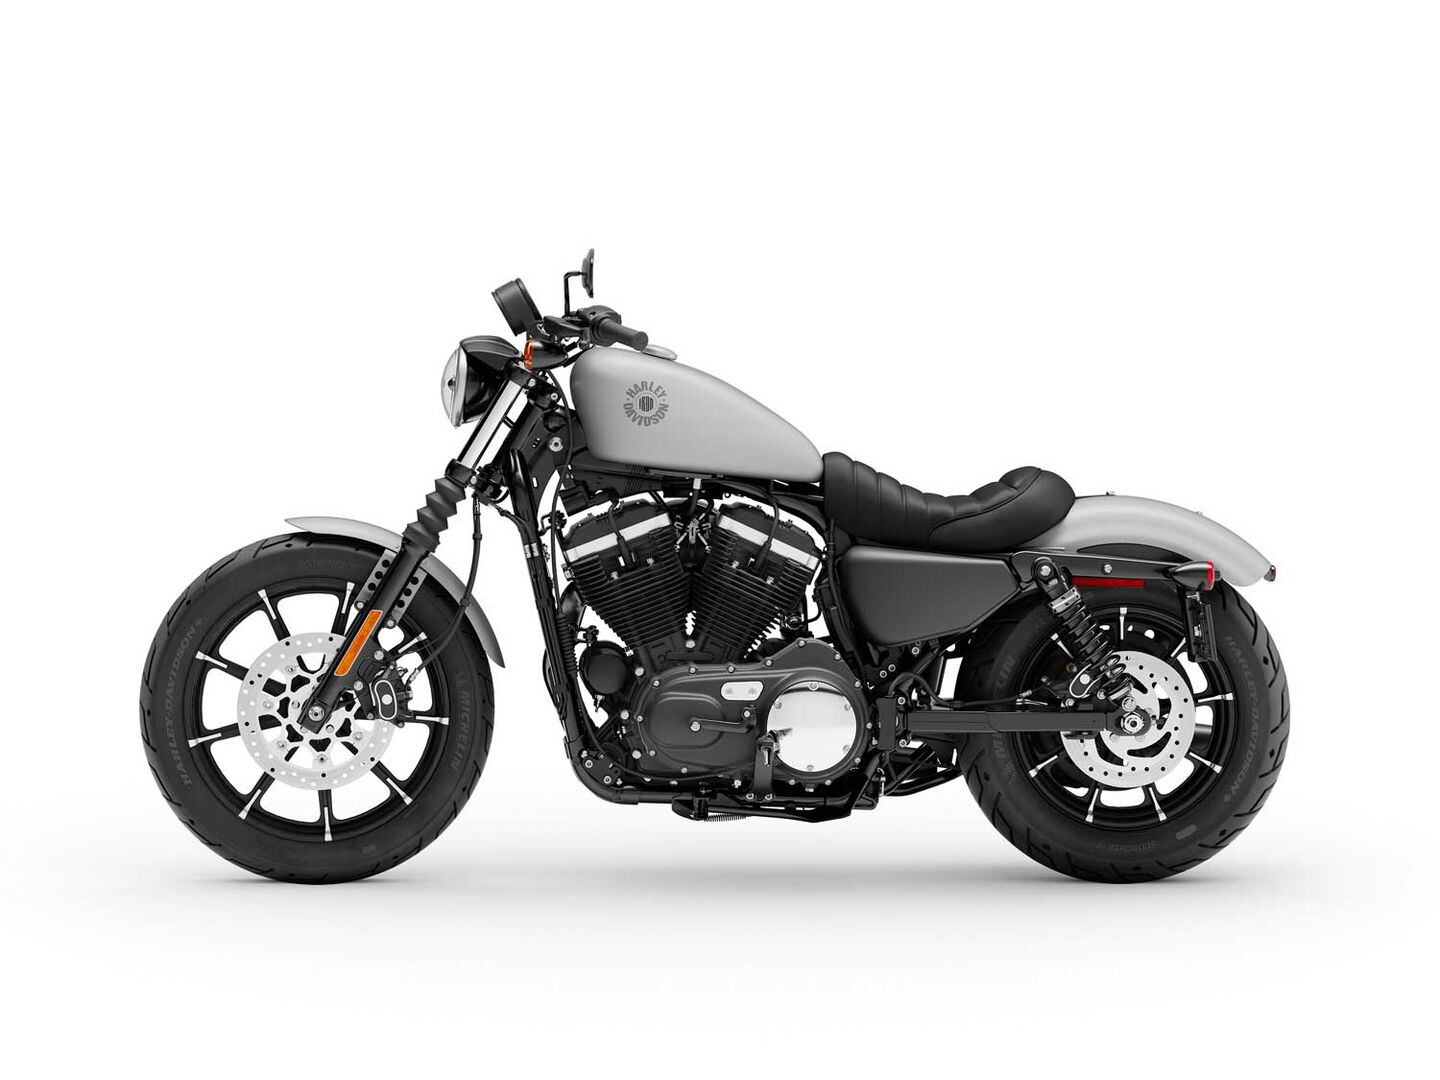 First Look At The 2020 Harley Davidson Sportster Lineup Motorcycle Cruiser